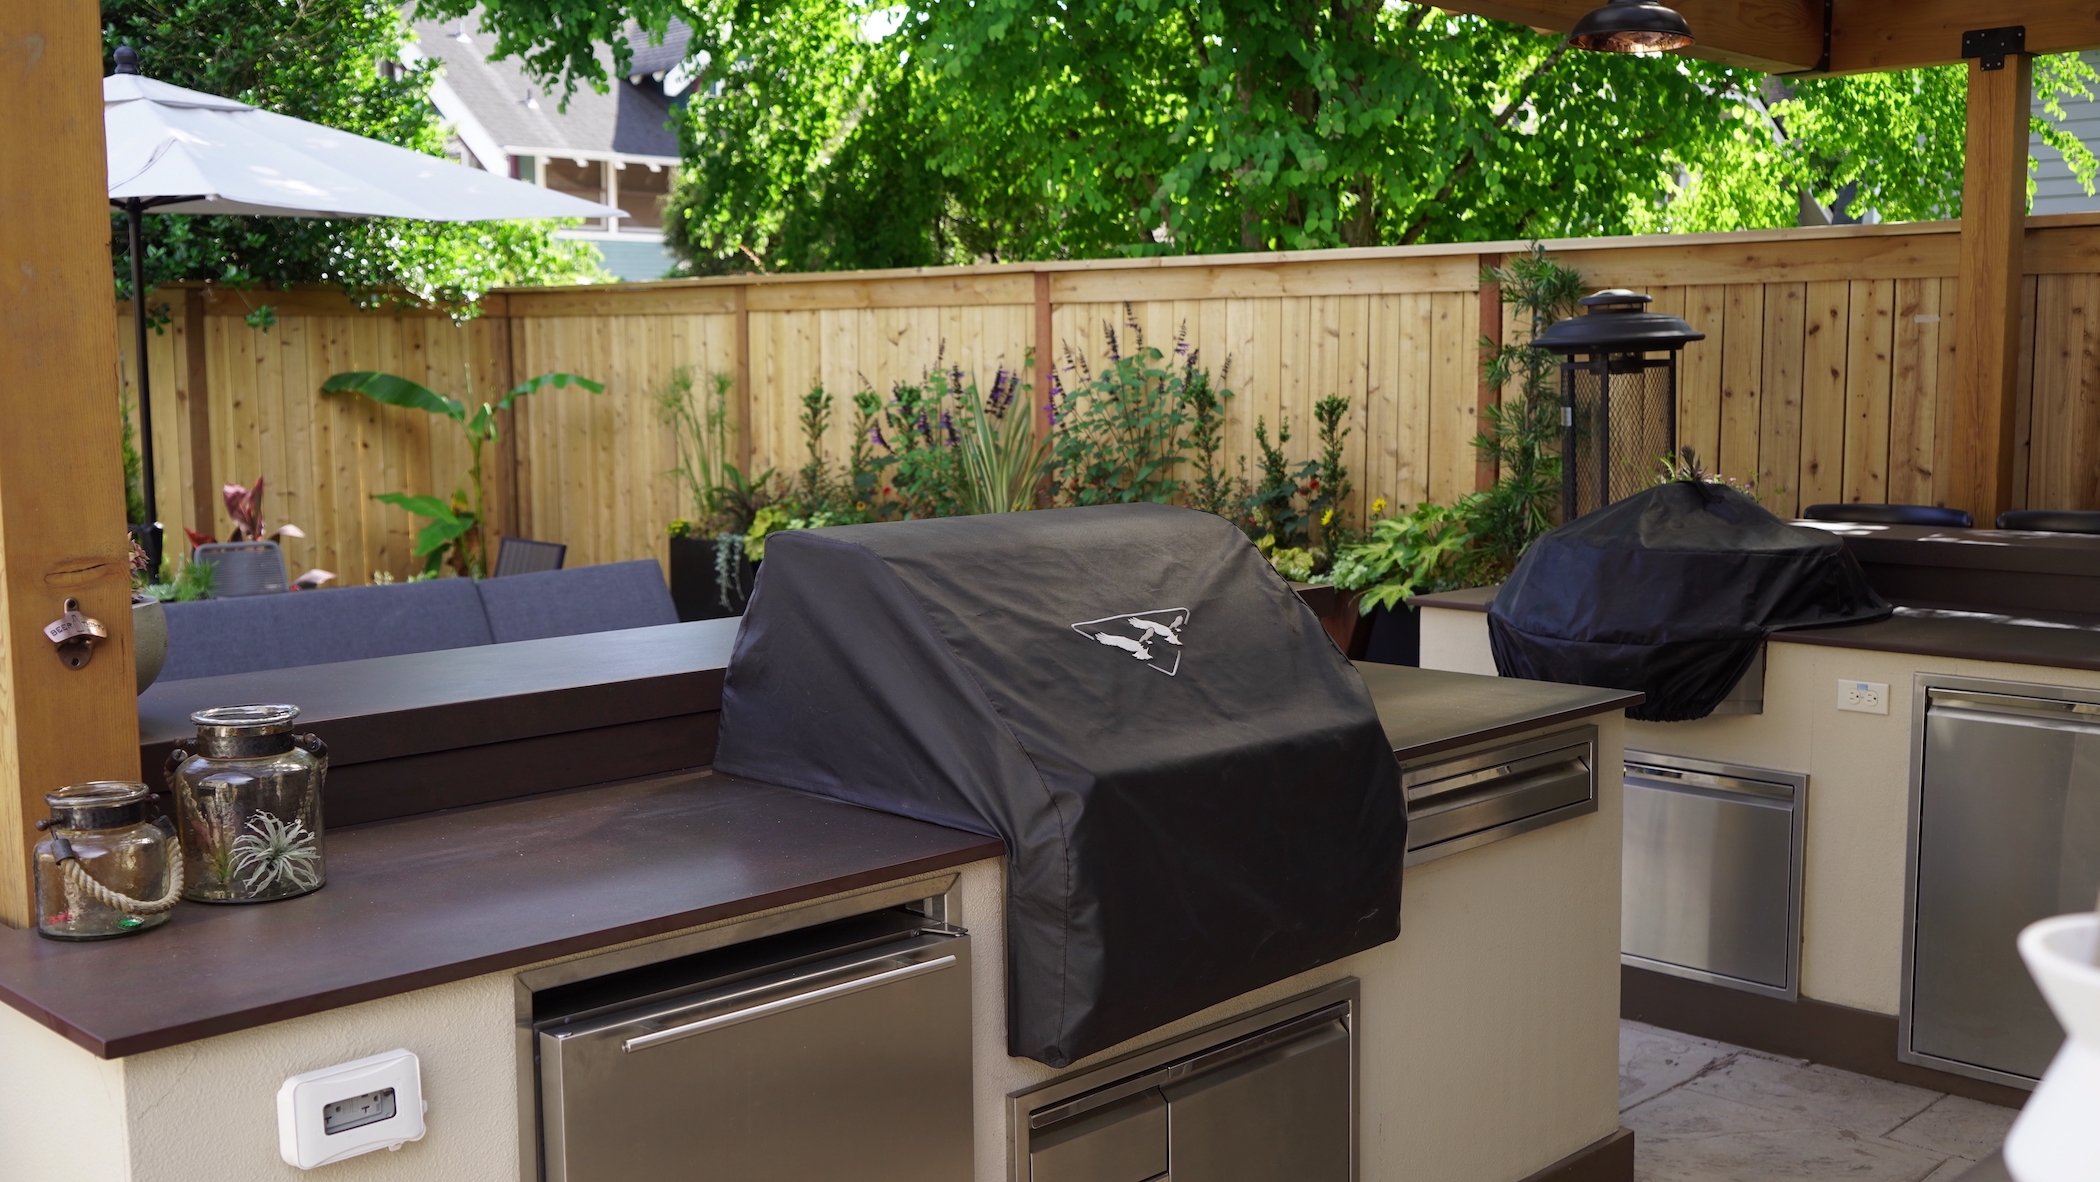 Built-in Grill Outdoor Kitchen - Grasstains Landscaping